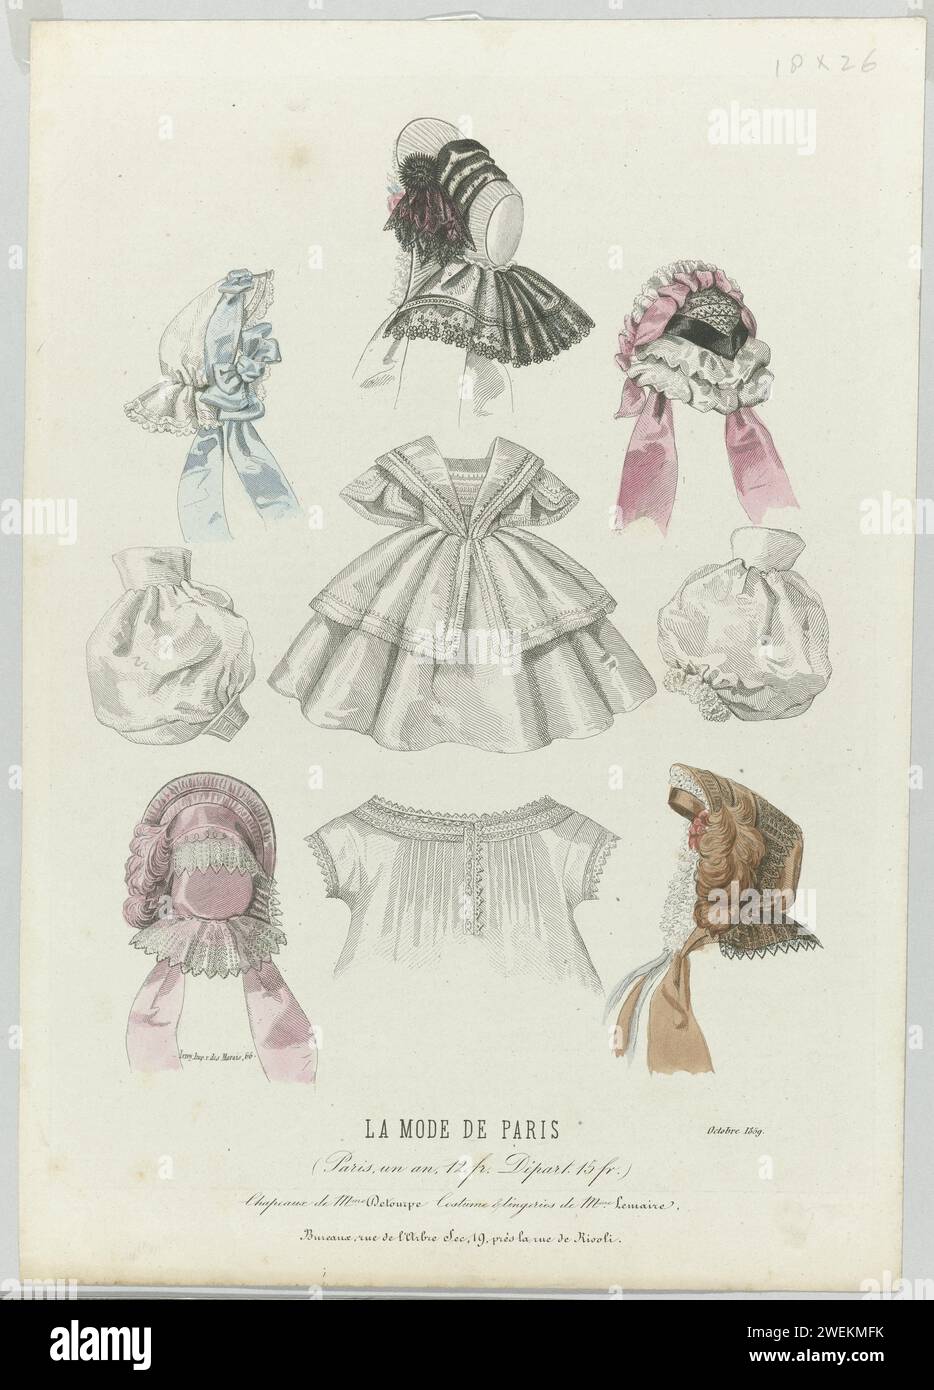 Paris fashion, October 1859: hats by Mme Détourp (...), 1859  Five different hats with bow ribbons, a dress, undershirt (chemise) and two loose pink -lodging. According to the caption: hats of Detourpe. Costume and 'lingeries' from Lemaire. Print from the fashion magazine La Mode de Paris (1857-1867).  paper engraving fashion plates. head-gear: hat (+ women's clothes). underclothes for the whole body (UNDERDRESS) (+ women's clothes). Stock Photo